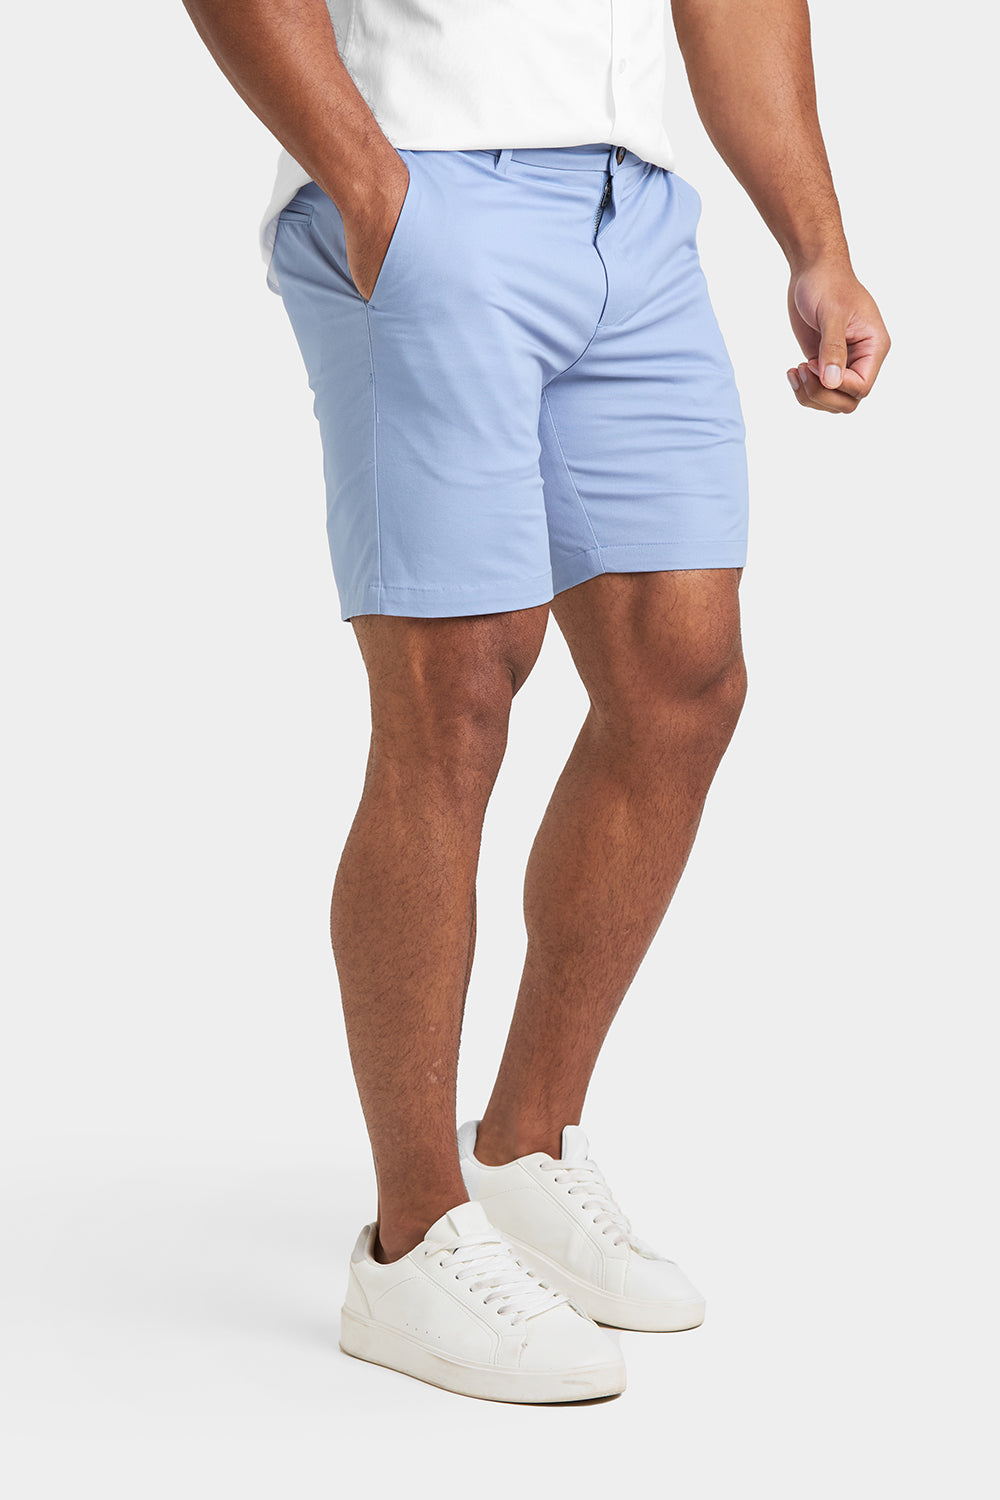 Muscle Fit Chino Shorts in Light Blue - TAILORED ATHLETE - ROW